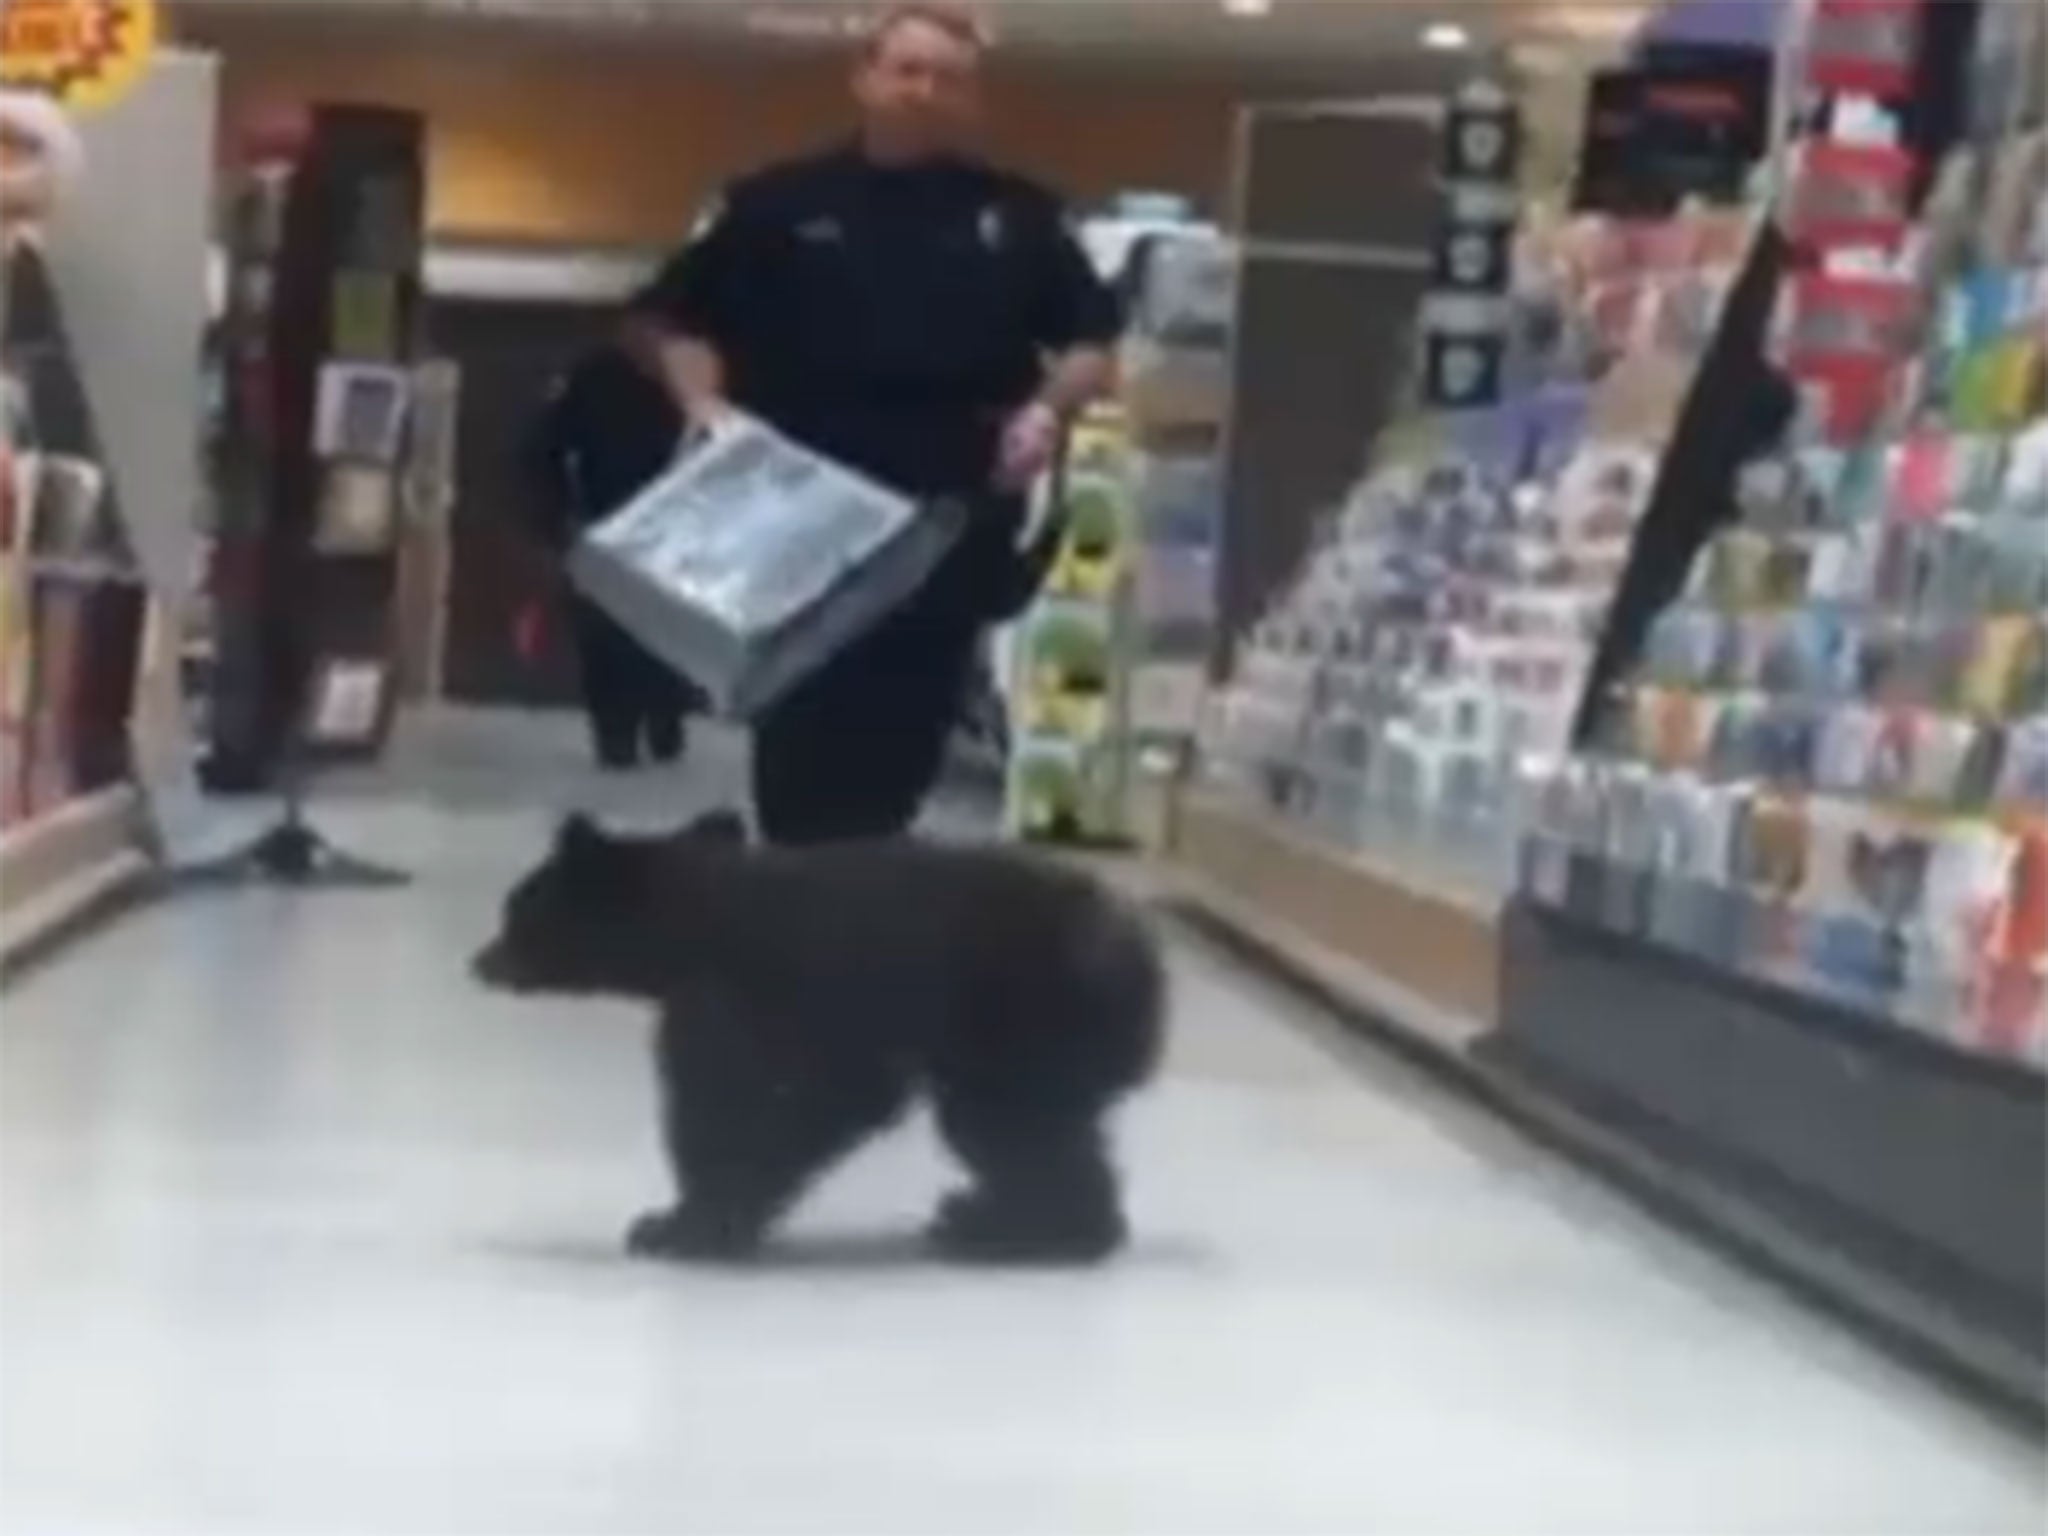 The bear was eventually court by a policeman with a shopping basket